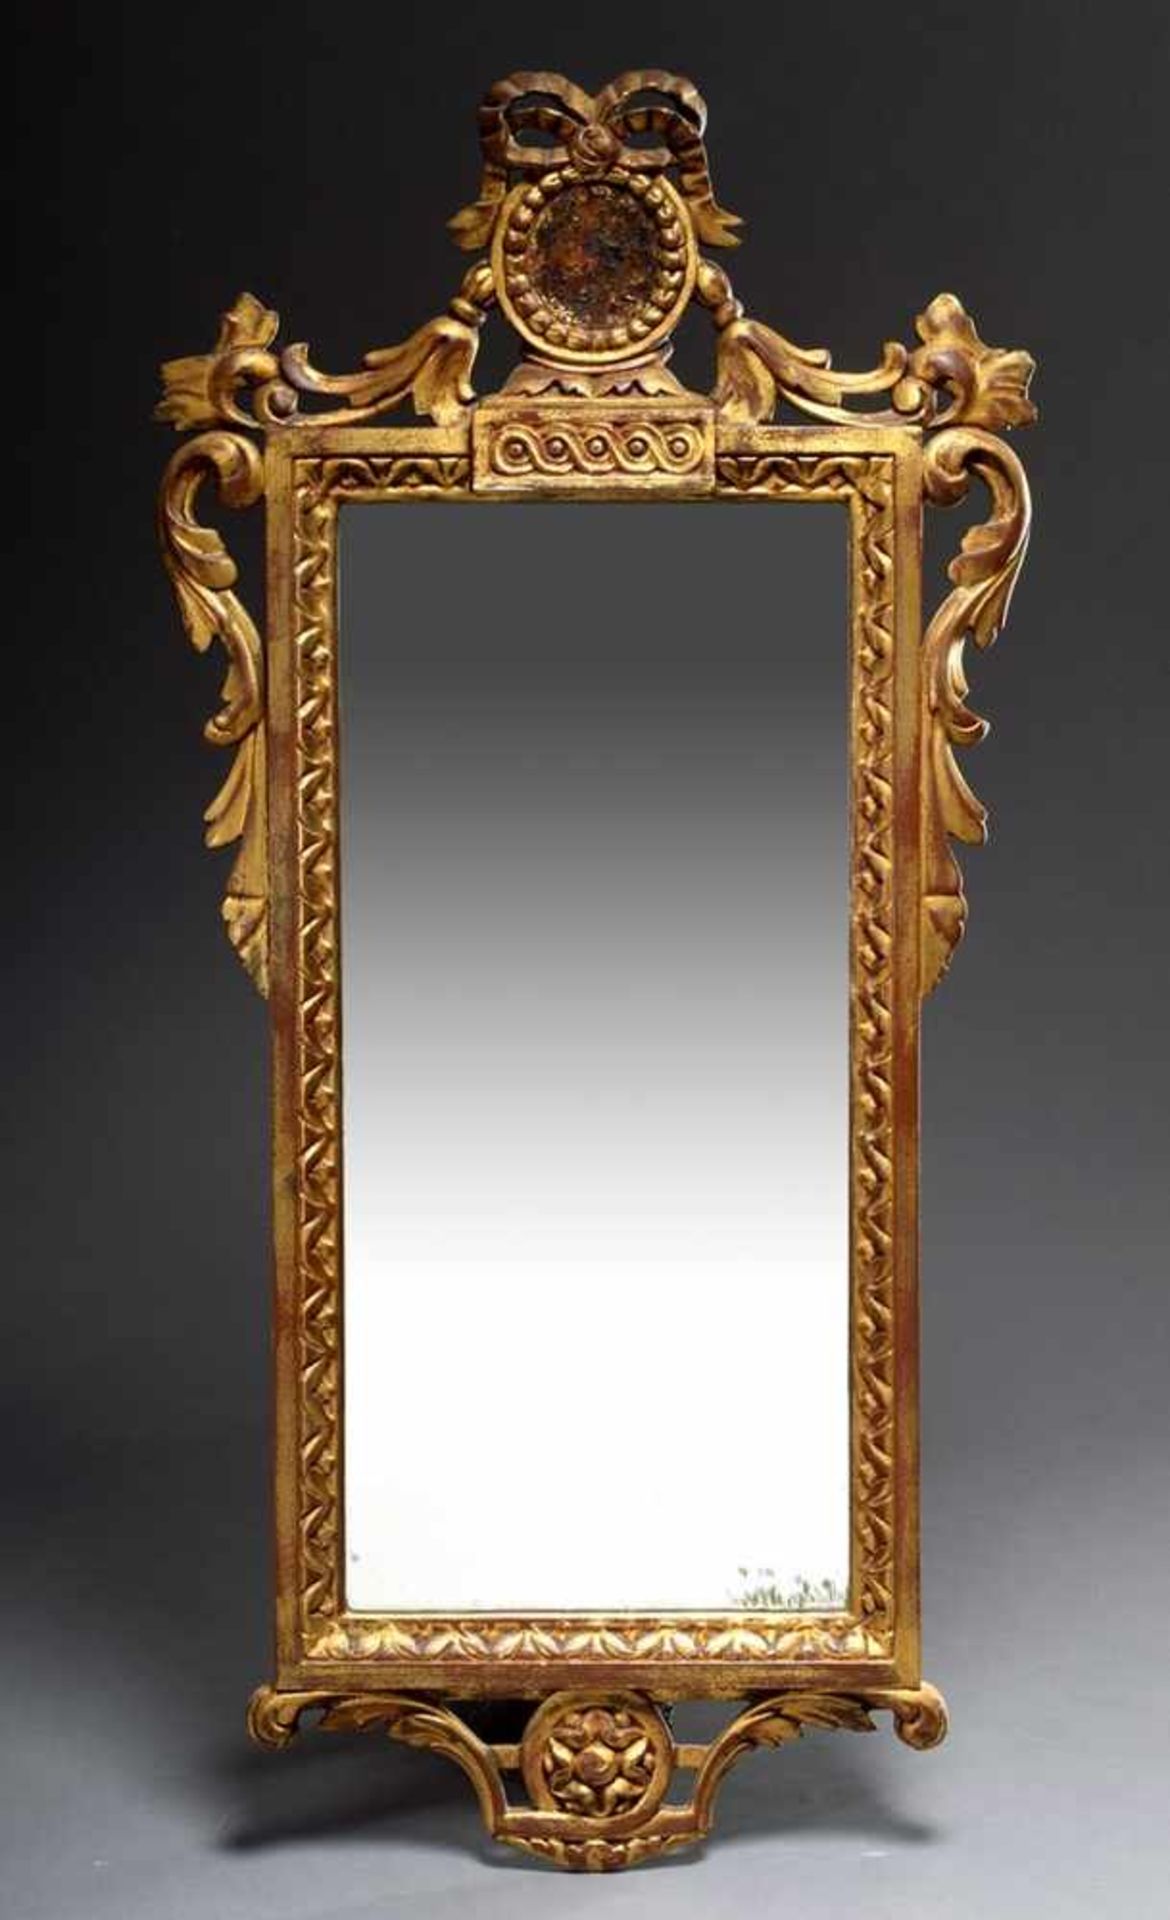 Small console mirror in classicistic style with medallion crown and draperies, wood carved and